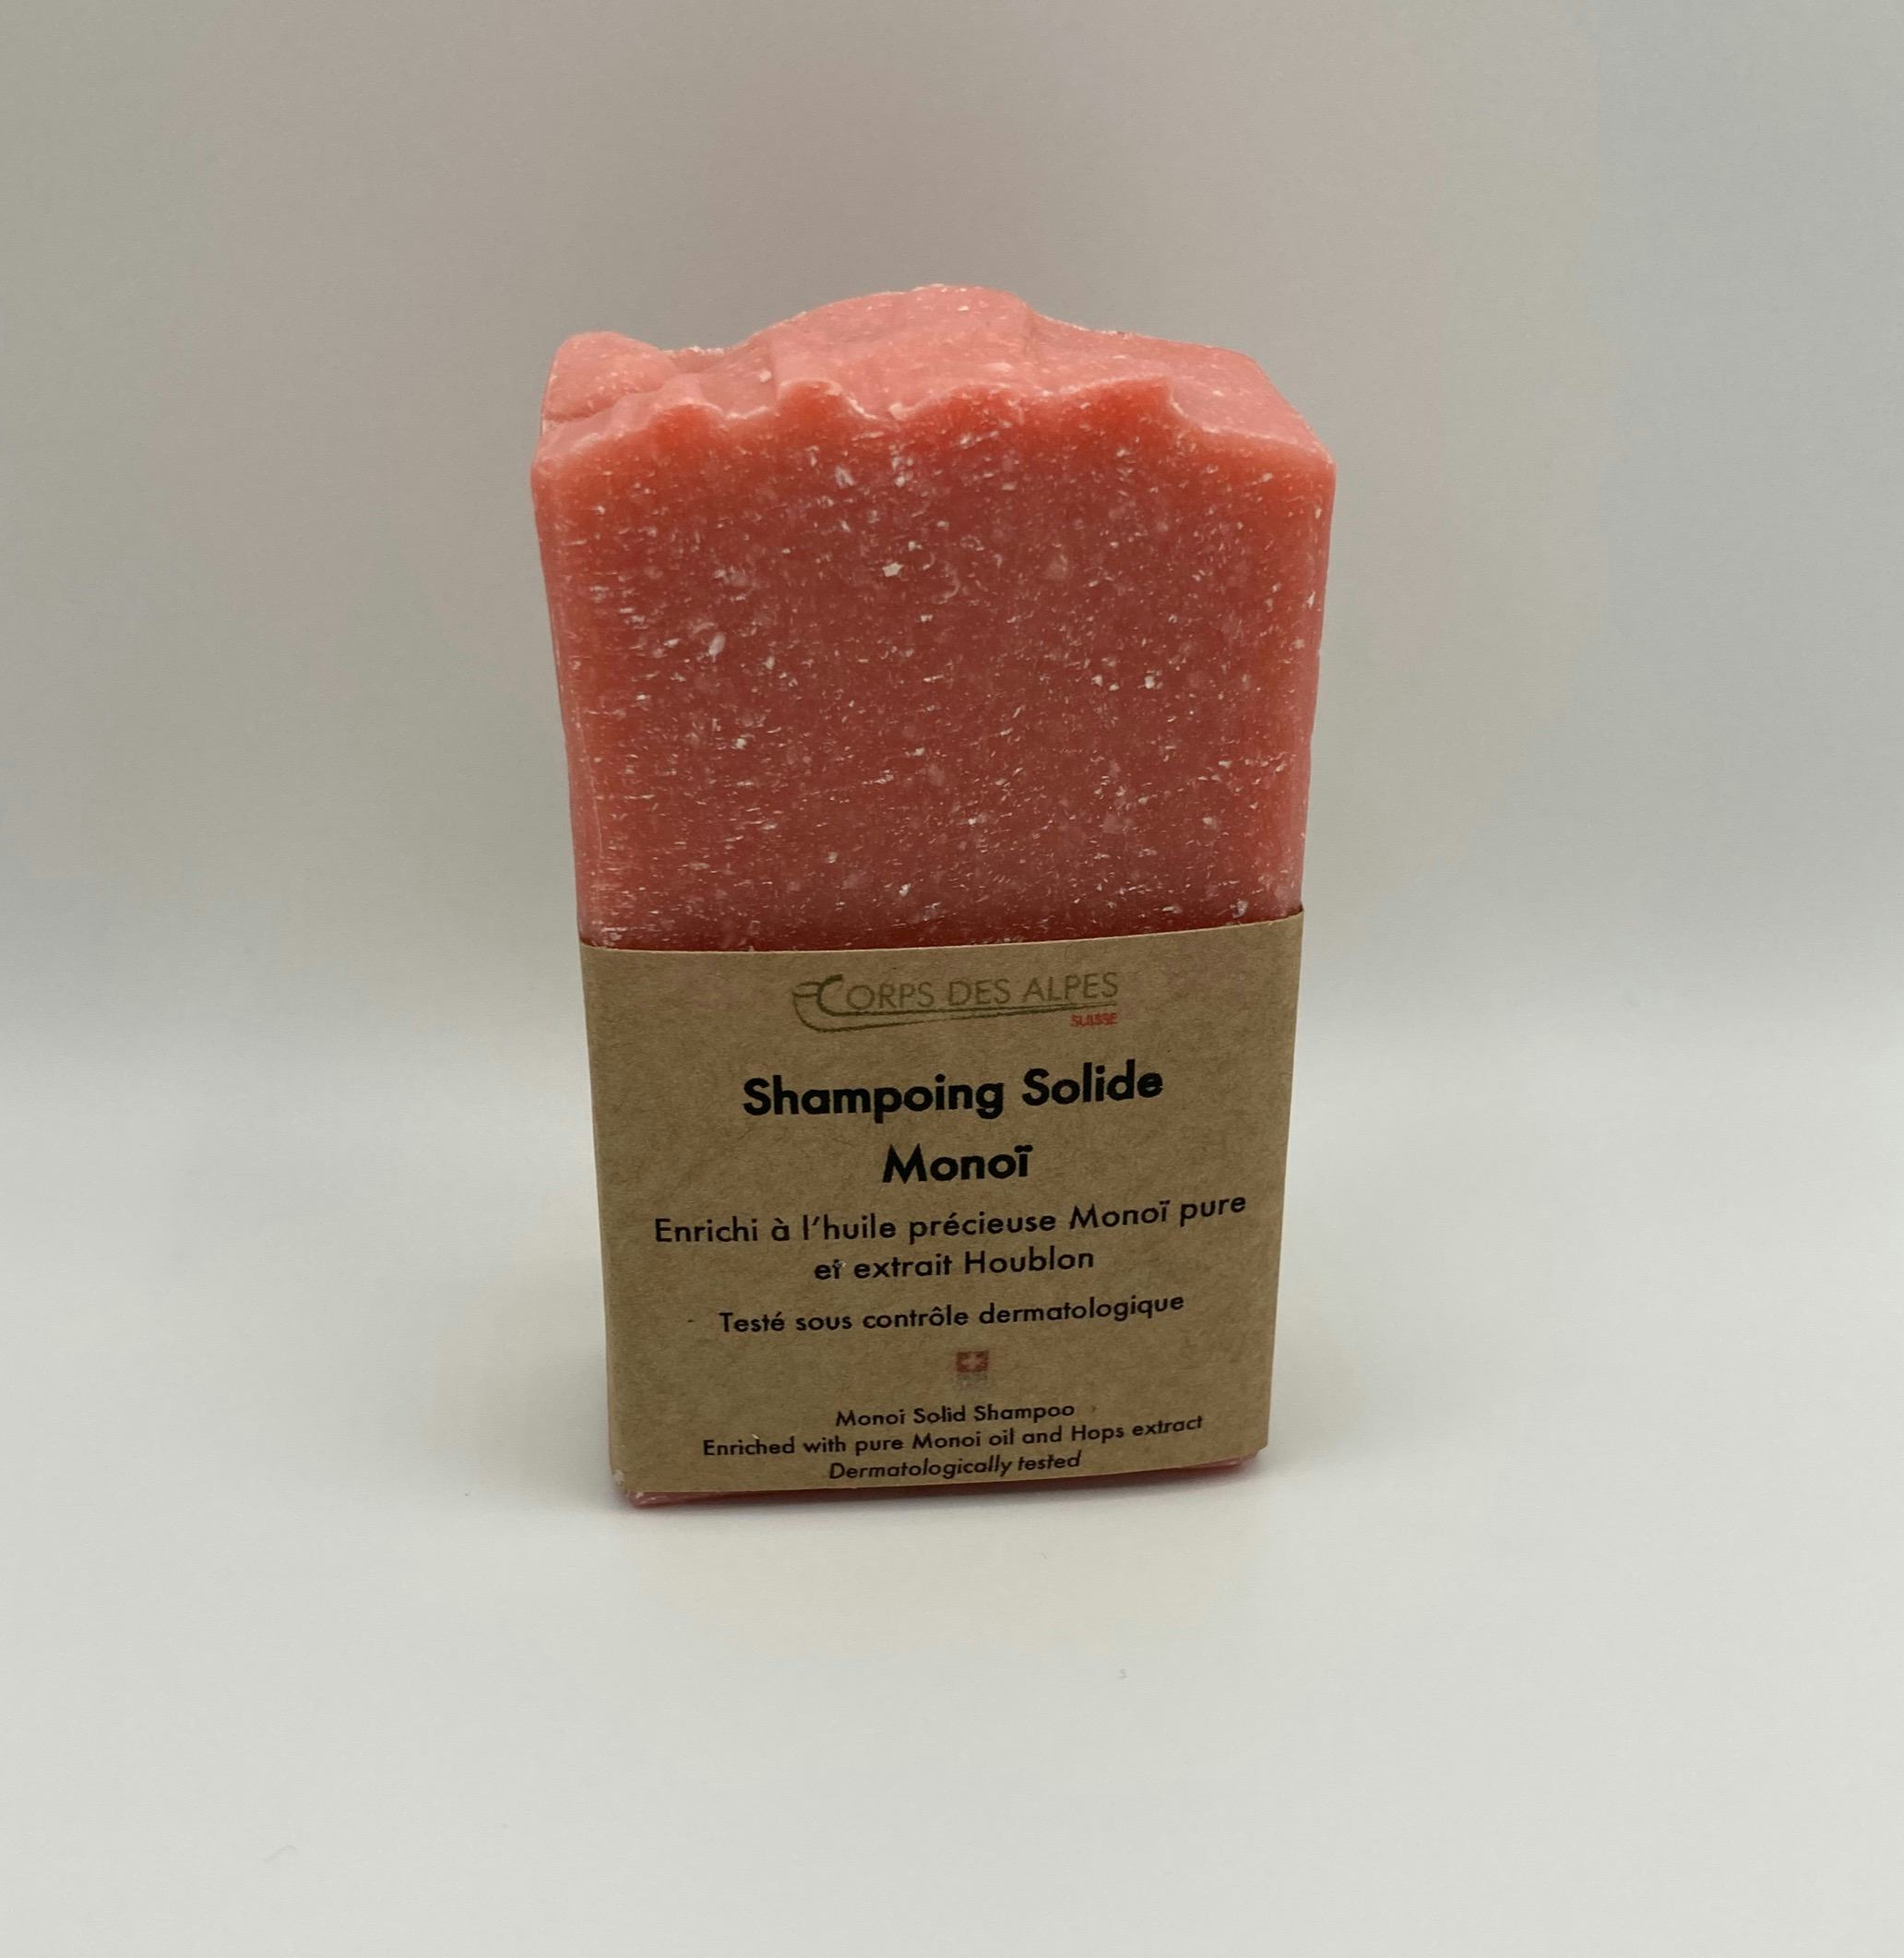 Shampoing solide Monoï, artisanal product for direct sale in Switzerland